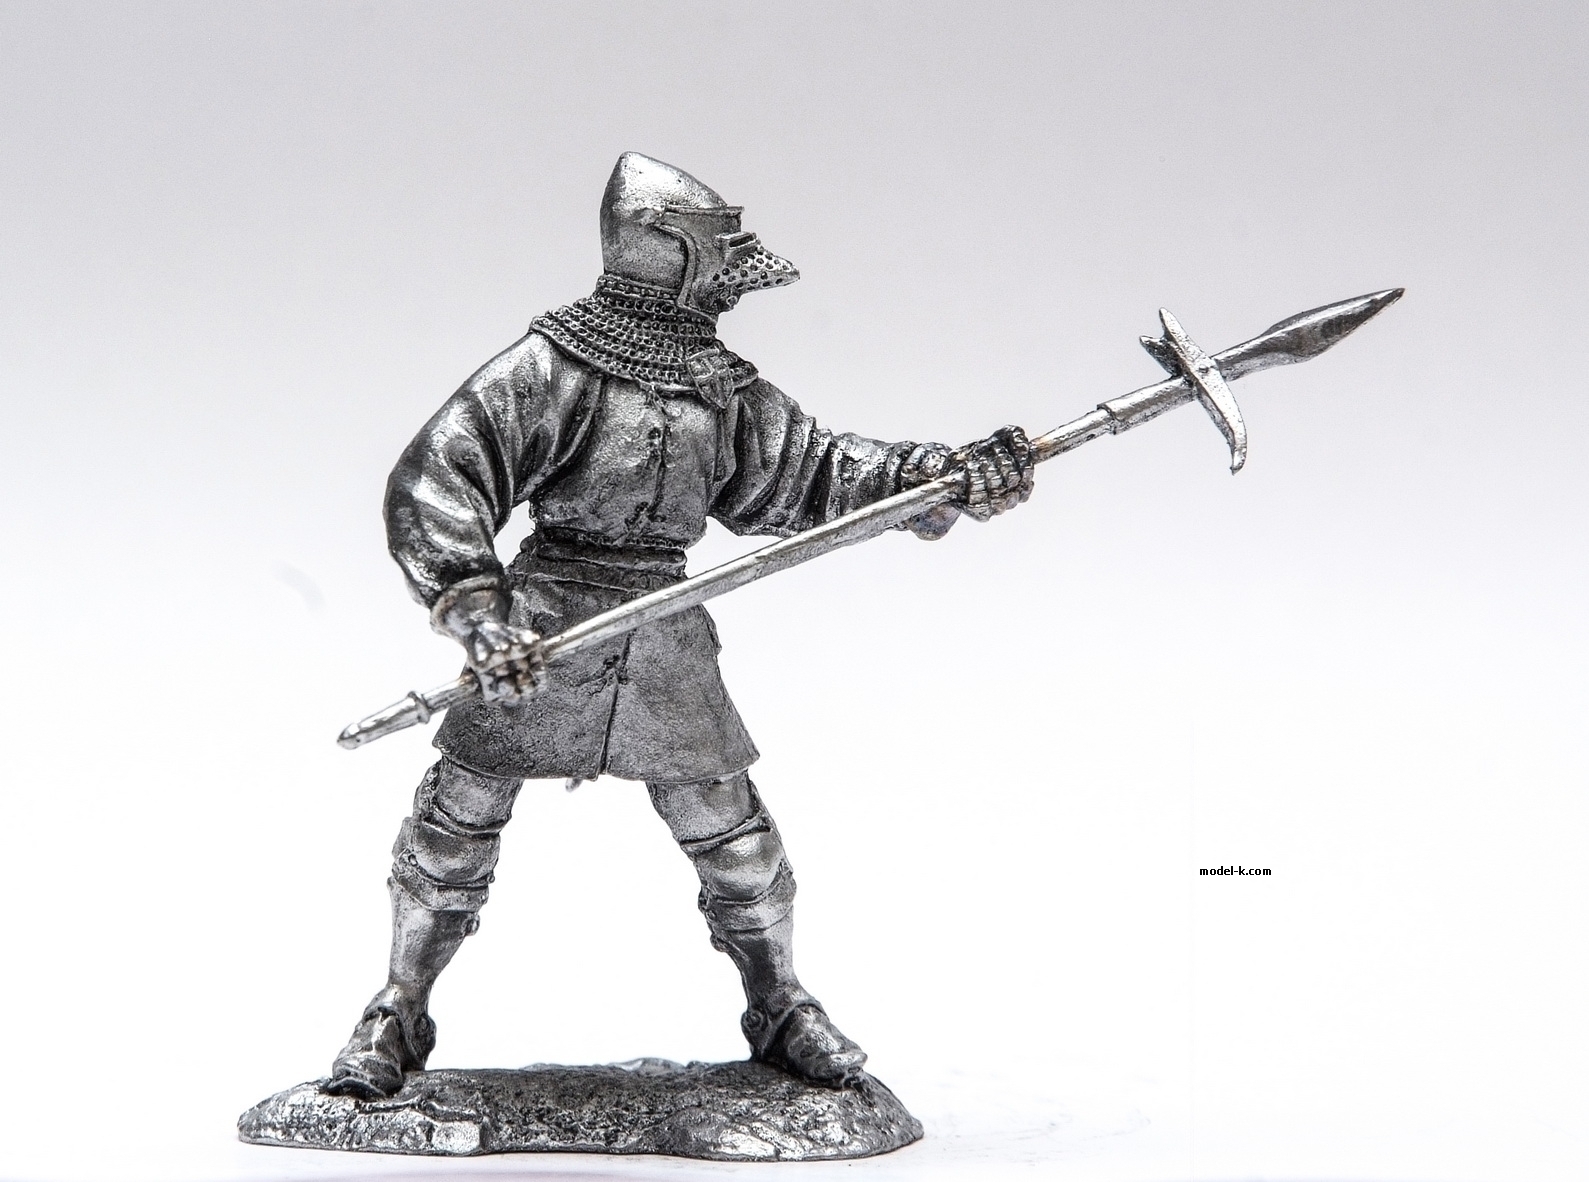 1:32 Scale Metal Miniature of Teutonic Knight